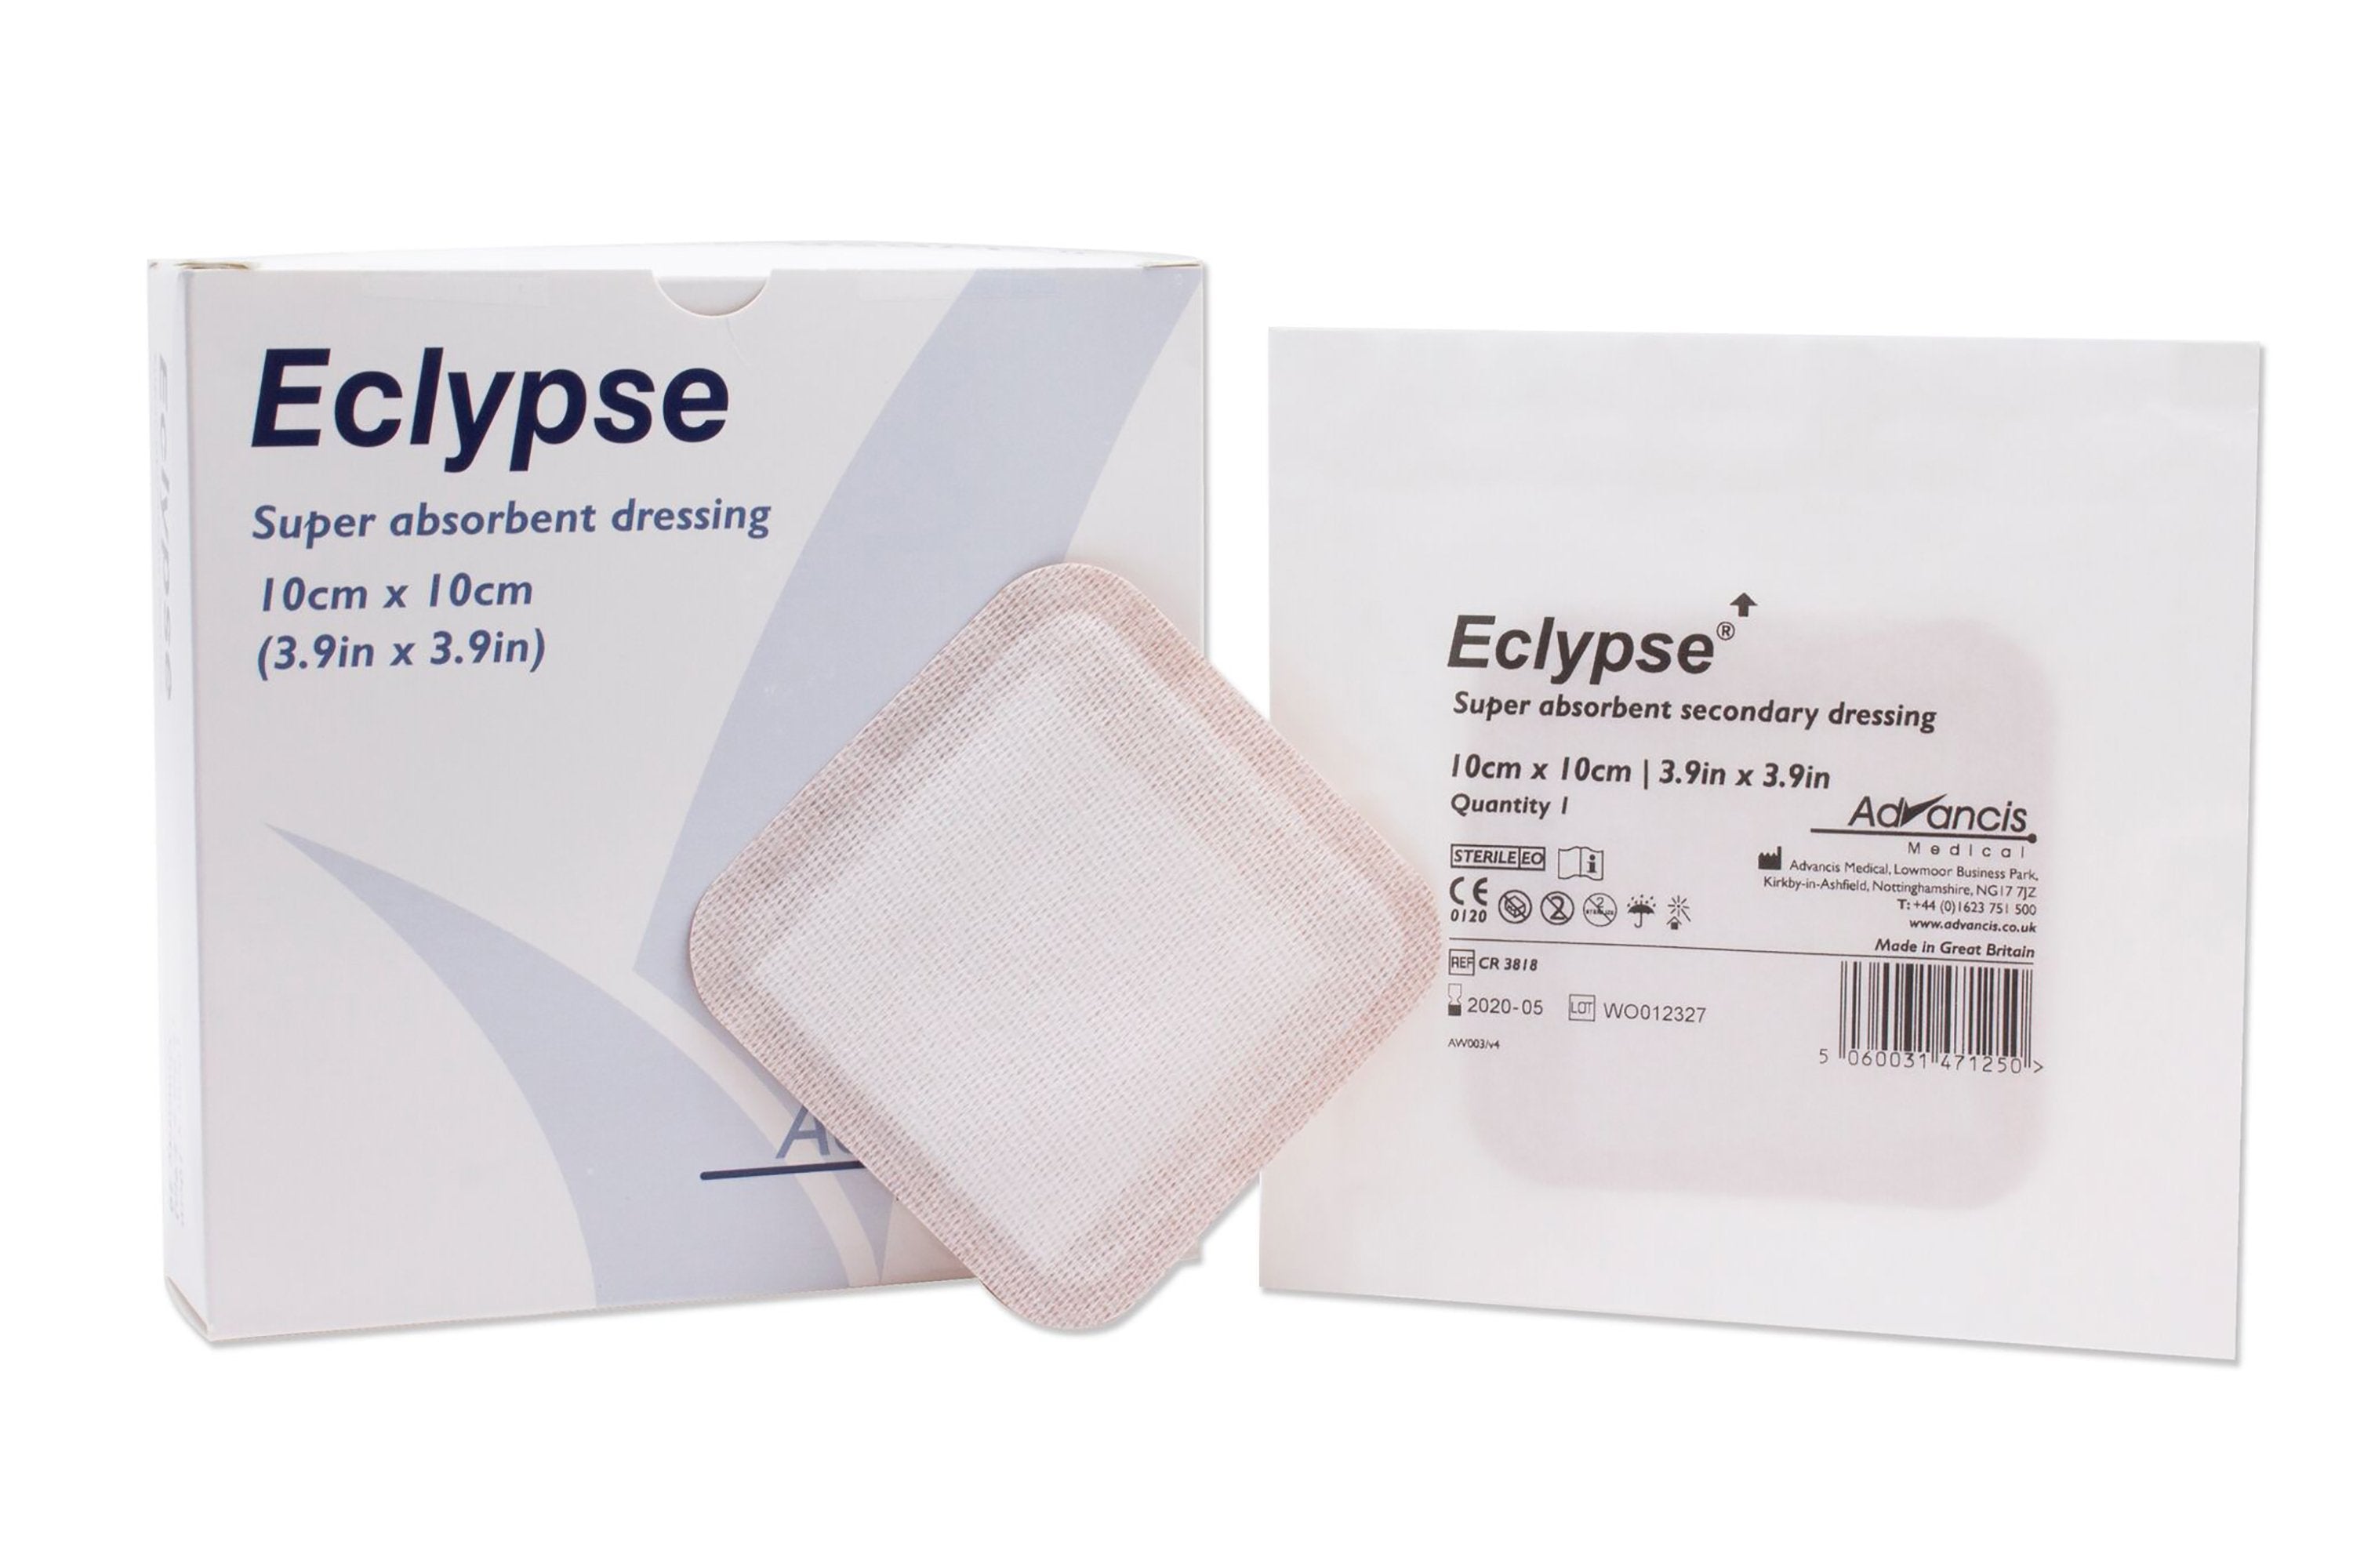 Super Absorbent Dressing Eclypse® 4 X 4 Inch Square